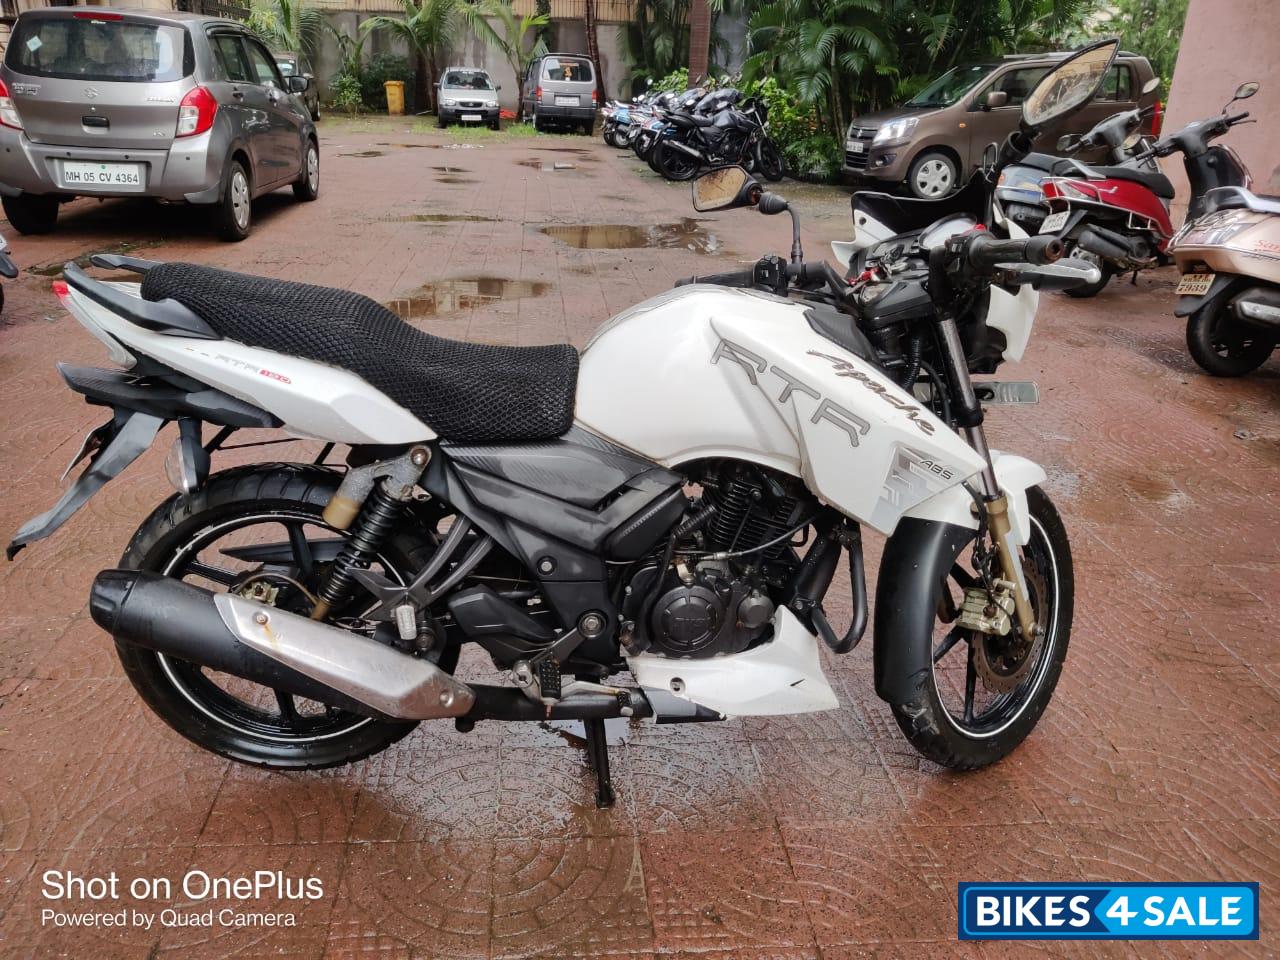 Used 2016 model TVS Apache RTR 180 ABS for sale in Thane ...